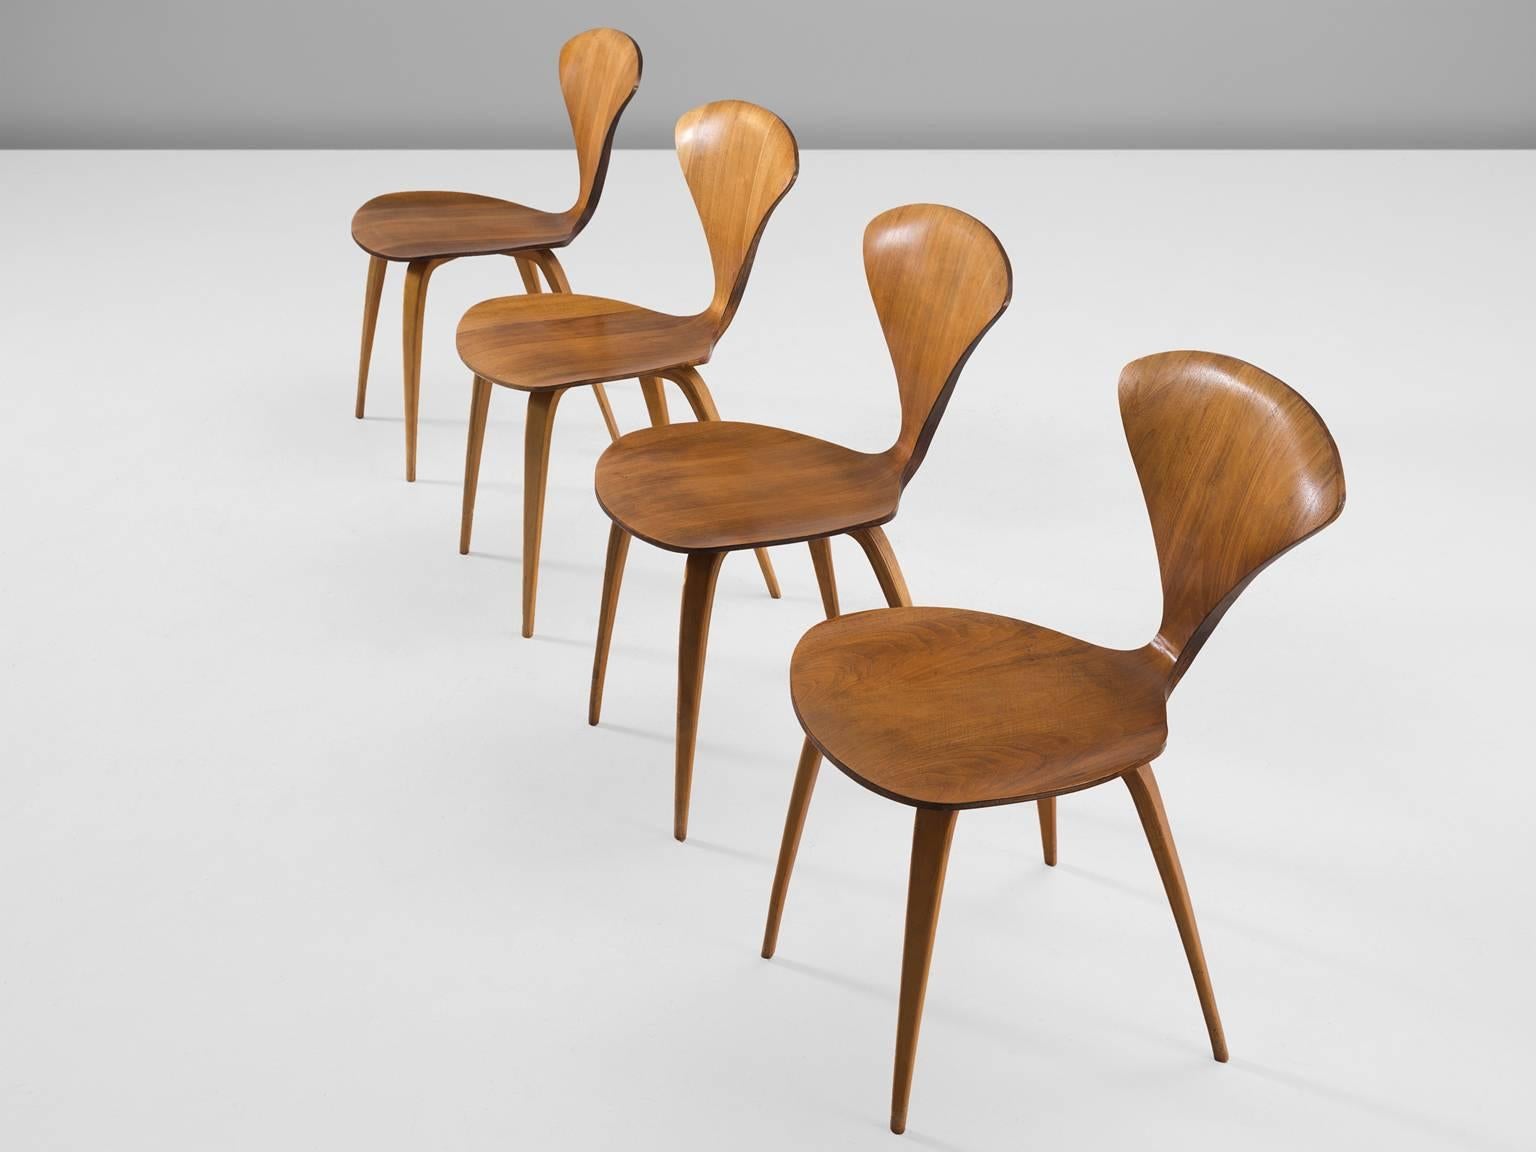 Set of four dining chairs, in walnut and plywood, by Norman Cherner for Plycraft, United States 1957.

These four classic Norman Cherner plywood chairs date from 1957. Their iconic shape resembles something like a delicate butterfly, yet do not be